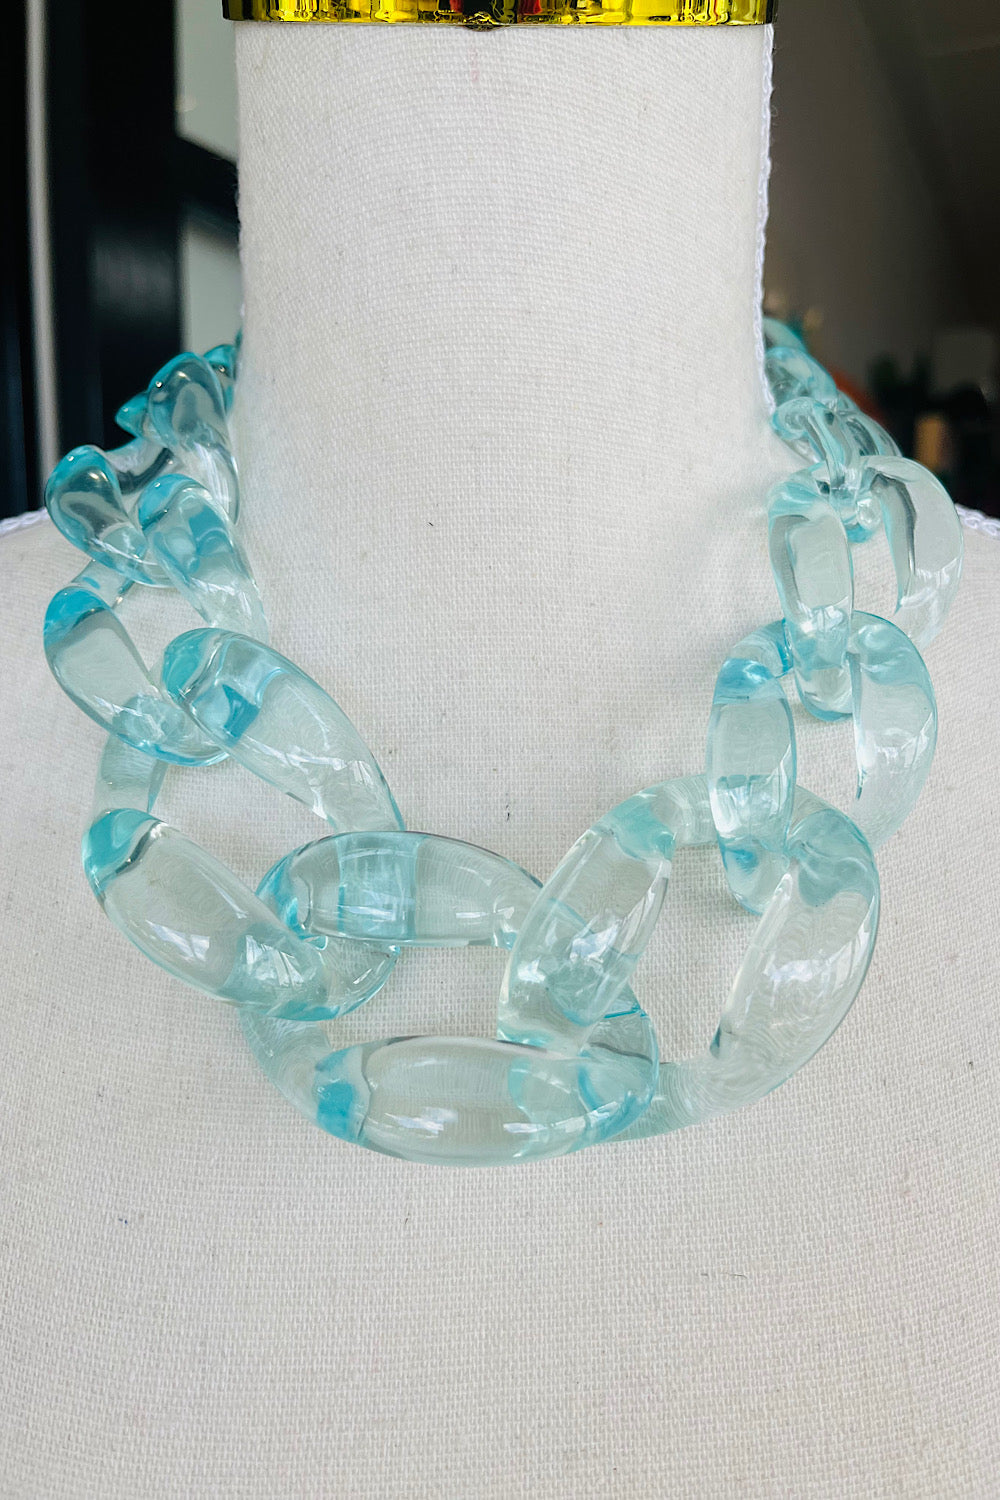 YOU'VE CHAINGED NECKLACE NEON ICE BLUE